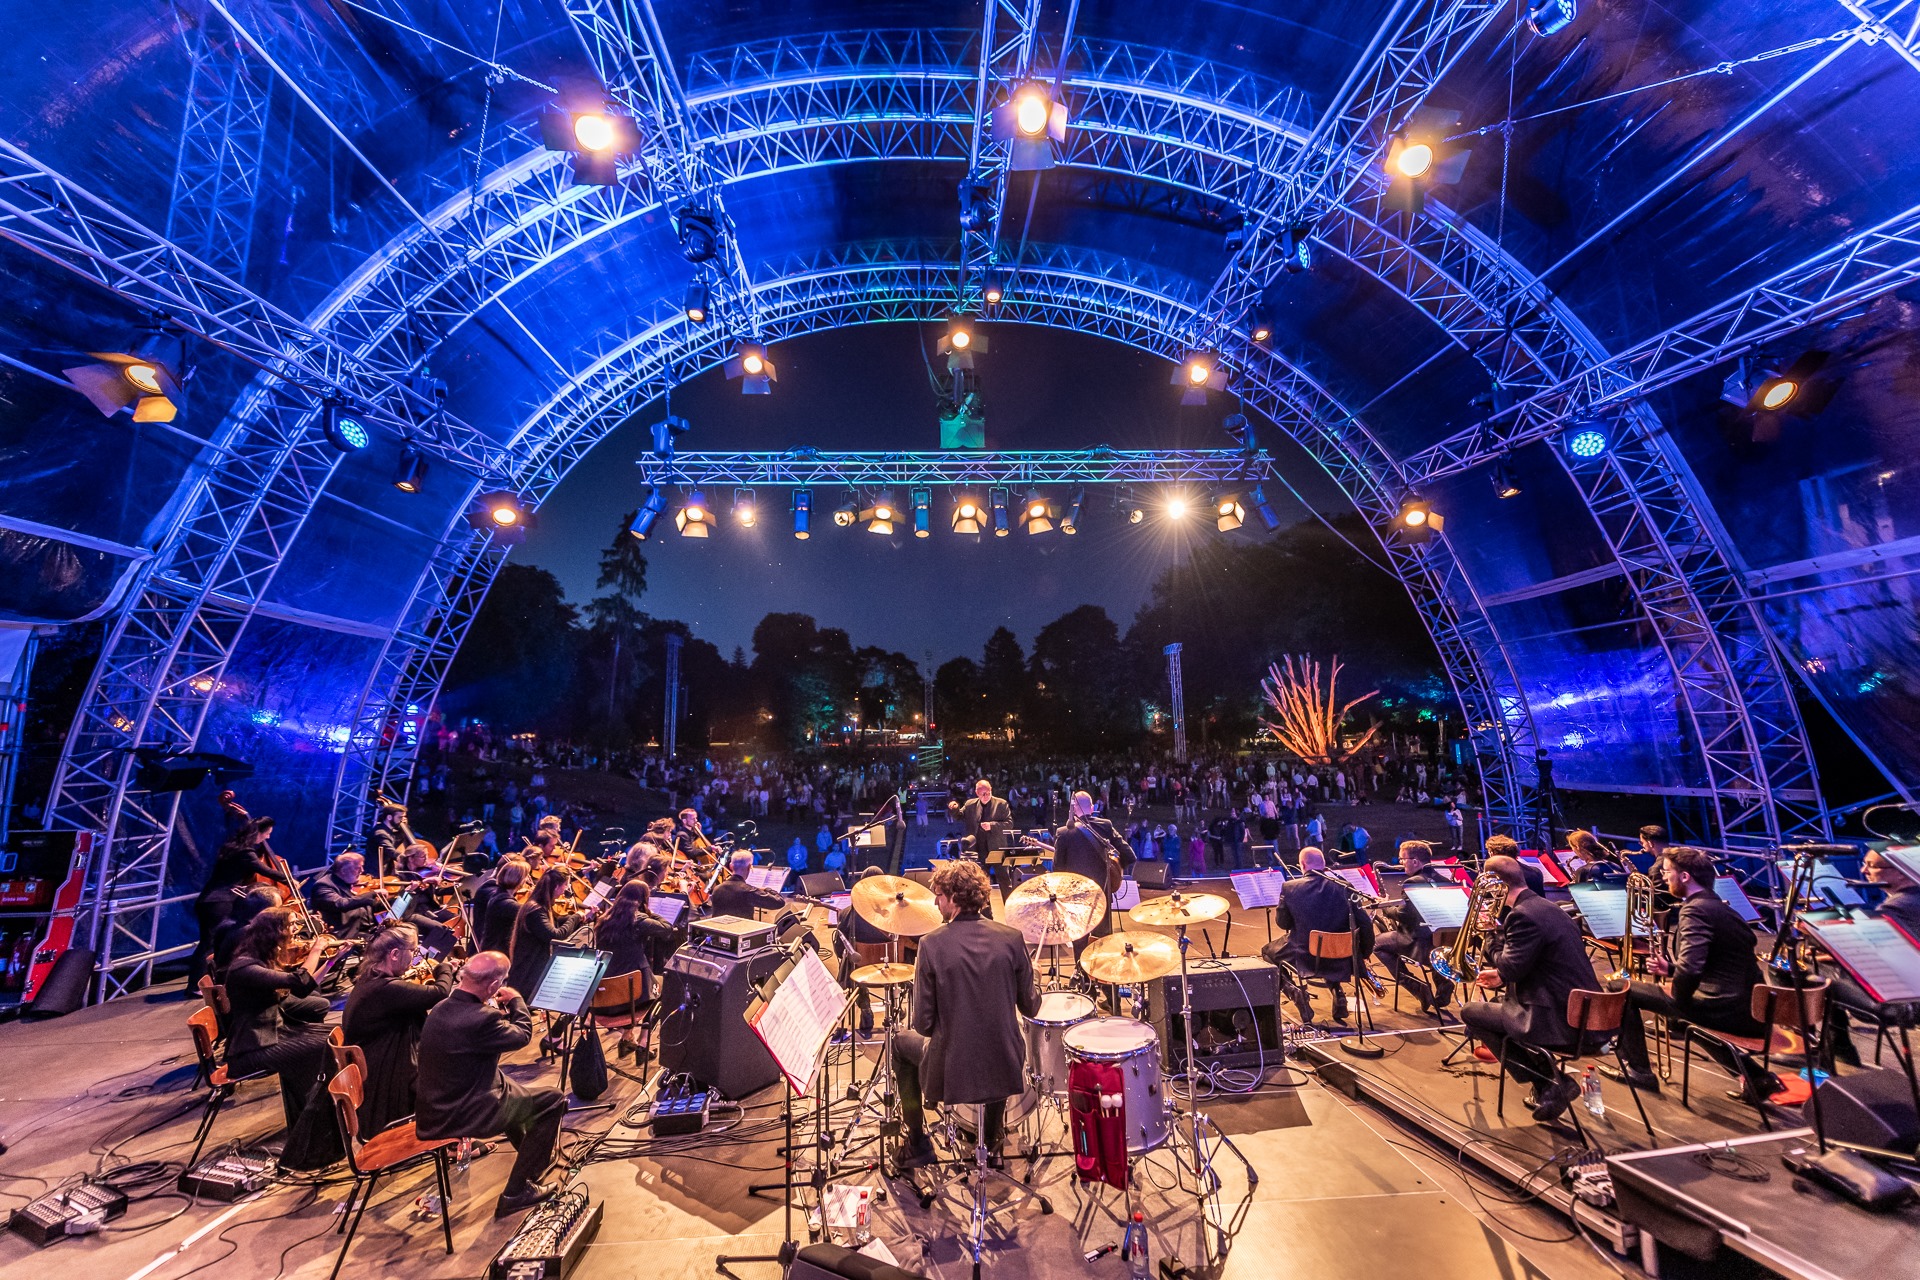 National Jazz Orchestra Luxembourg & Estro Armonico. on the Kinegswis 2019, Direction: Gast Waltzing © standart.lu